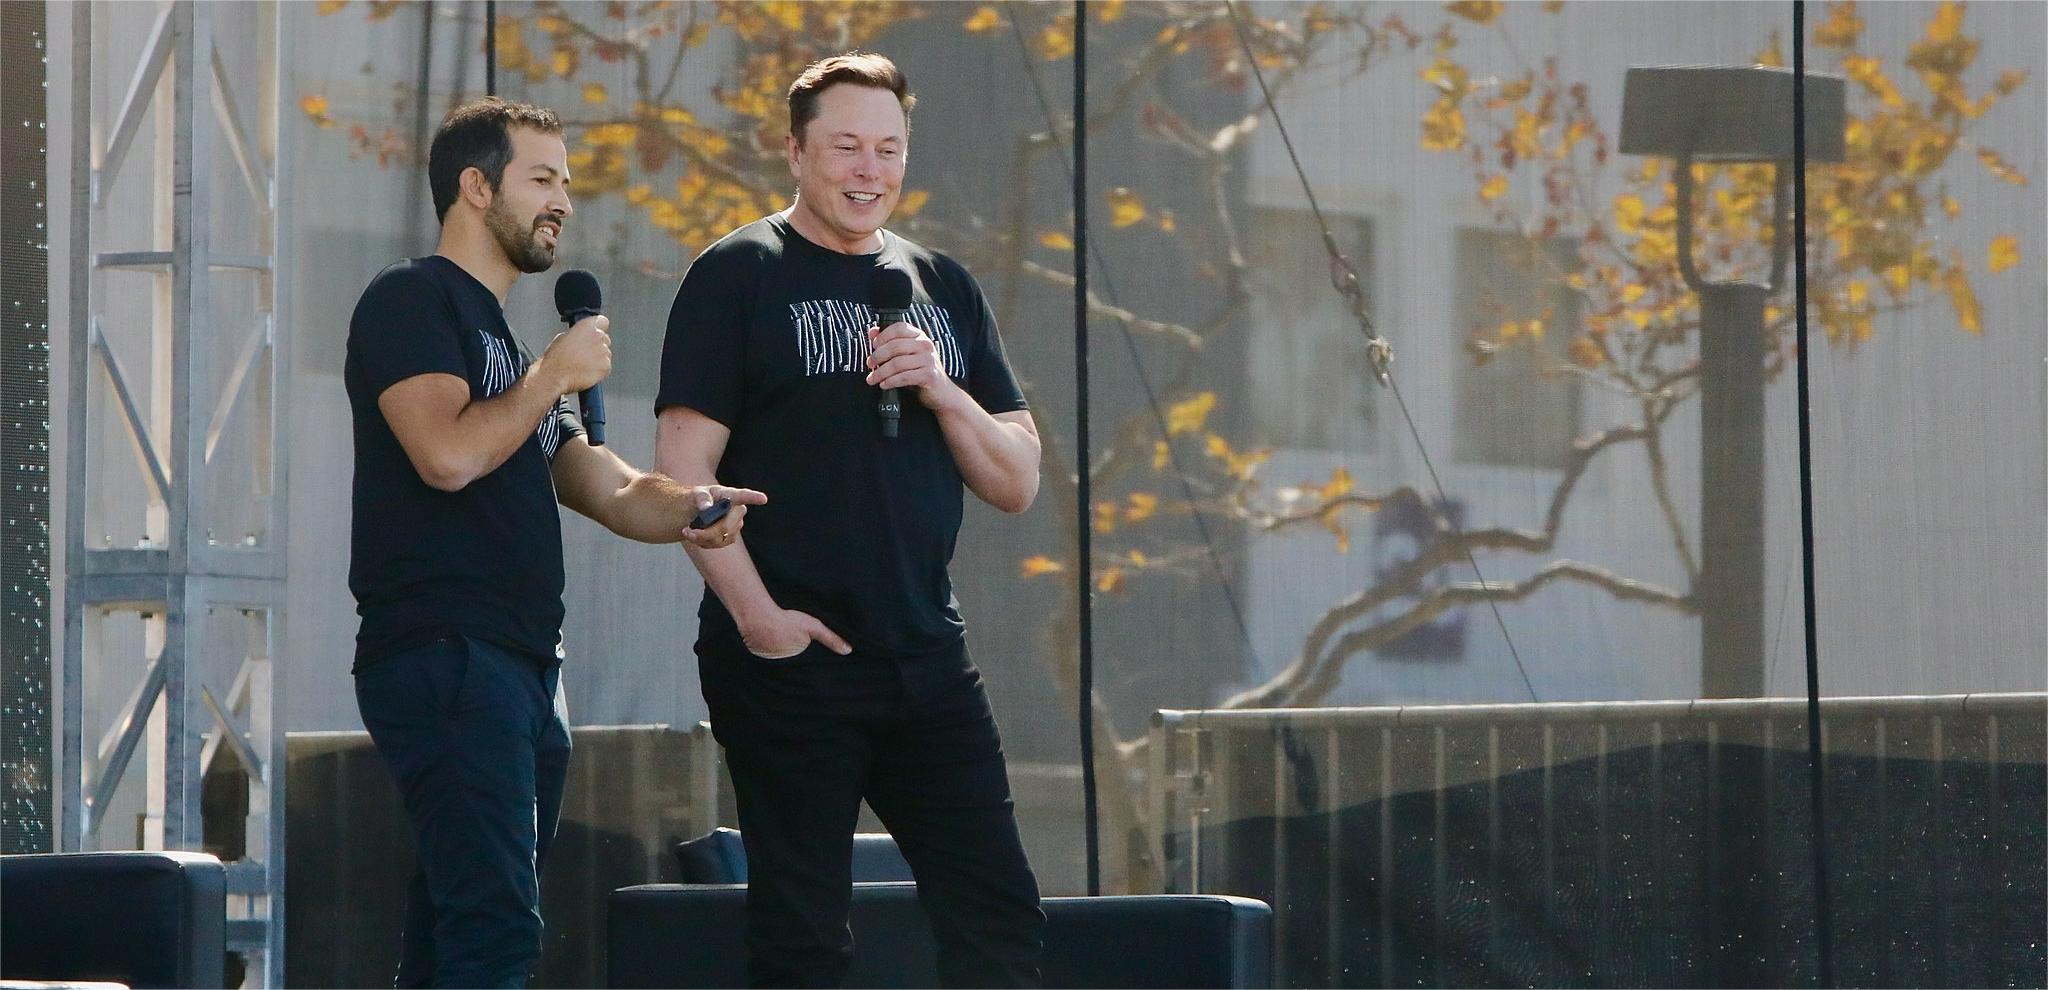 Elon Musk Endorses the Concept of a New Performance-Based Compensation Plan at Tesla - Tesery Official Store